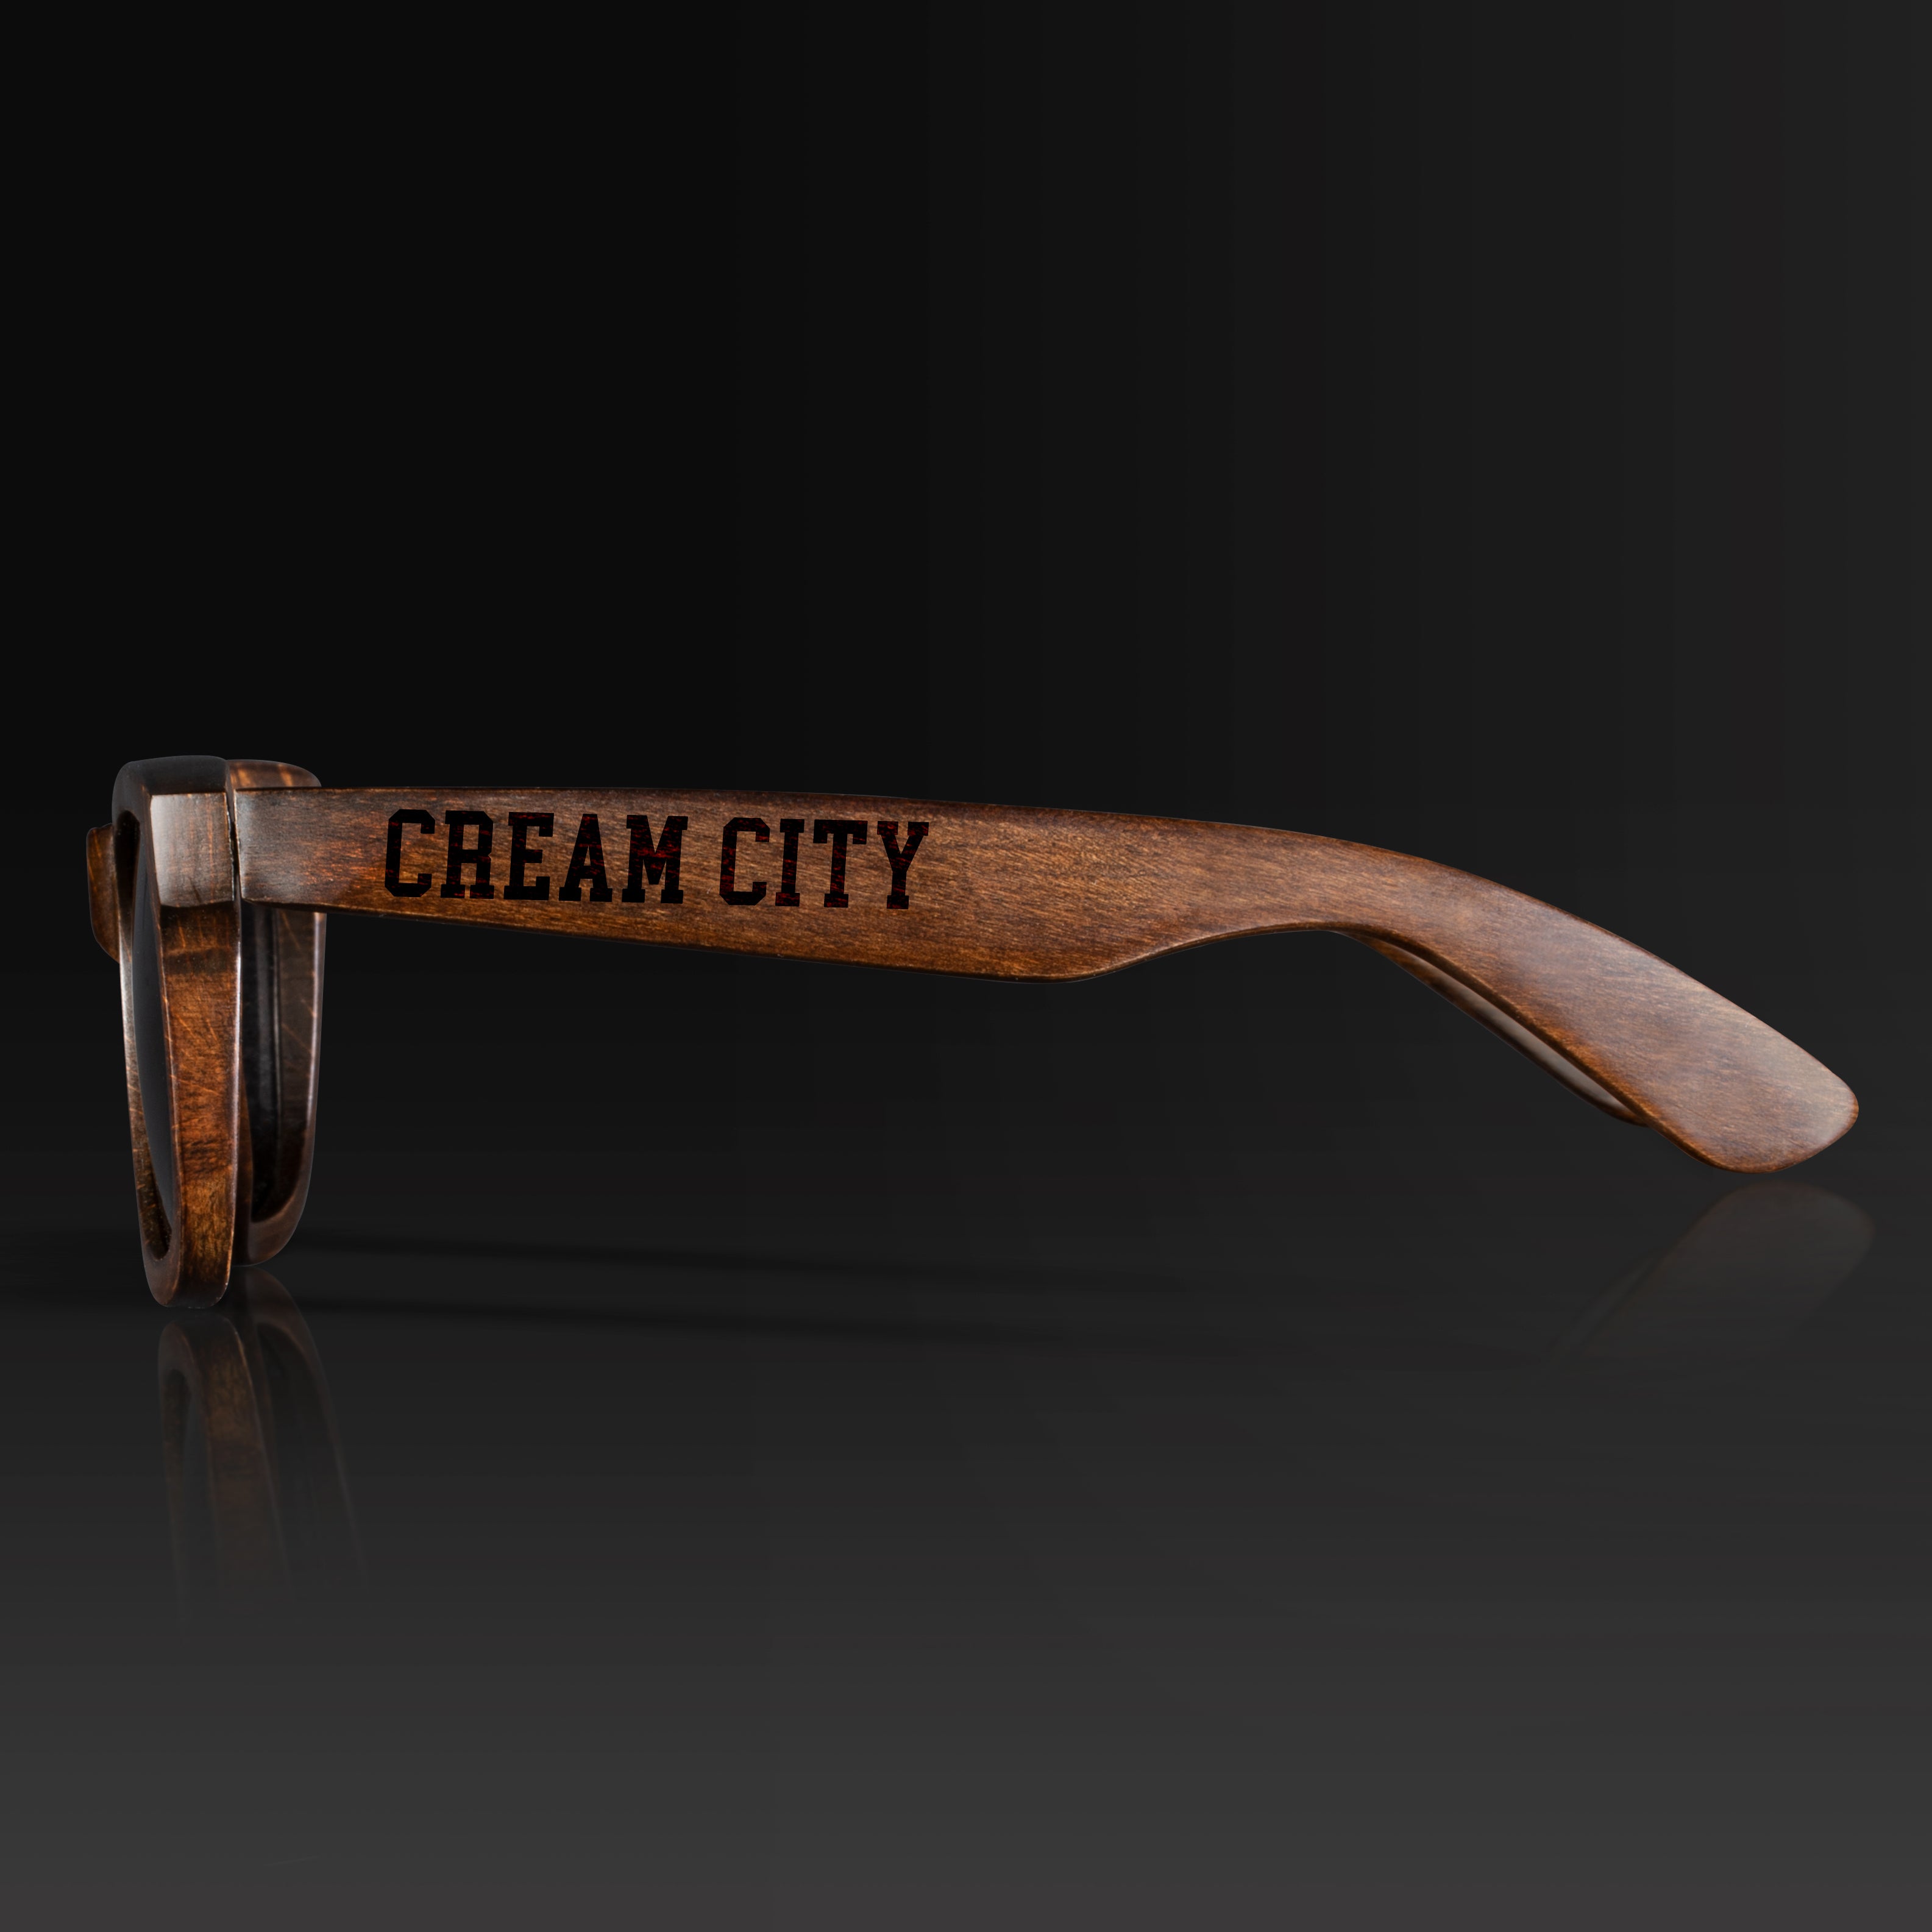 Cream City II Wisconsin Wood Sunglasses with custom engraving. Custom Cream City II Wisconsin Gifts For Men -  Sustainable Cream City II Wisconsin eco friendly products - Personalized Cream City II Wisconsin Birthday Gifts - Unique Cream City II Wisconsin travel Souvenirs and gift shops. Cream City II Wisconsin Wayfarer Eyewear and Shades Side